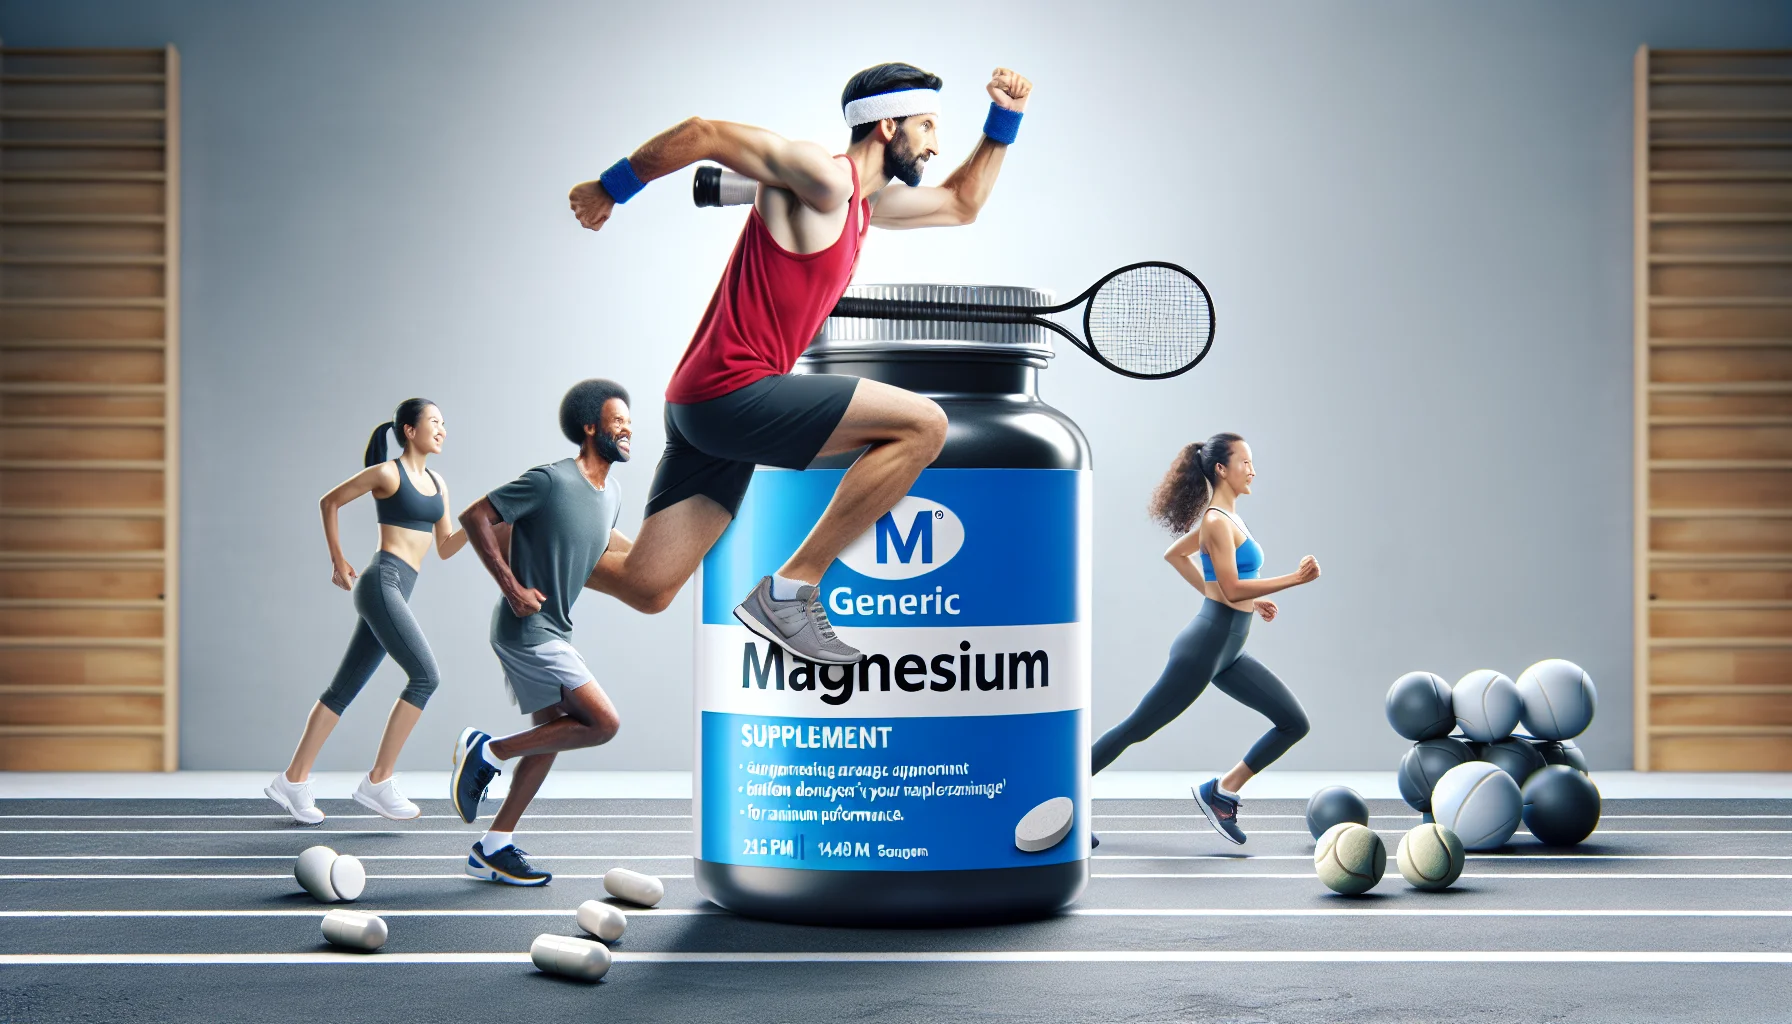 Generate a humorous and realistic image of a generic brand of magnesium supplement participating in a variety of sports activities. This might include elements such as the supplement bottle running a marathon with a sweatband on its lid, using a racquet to play tennis, or doing push-ups in a gym. Display this scenario enticing athletic people to incorporate more supplements into their daily routines for maximum performance.